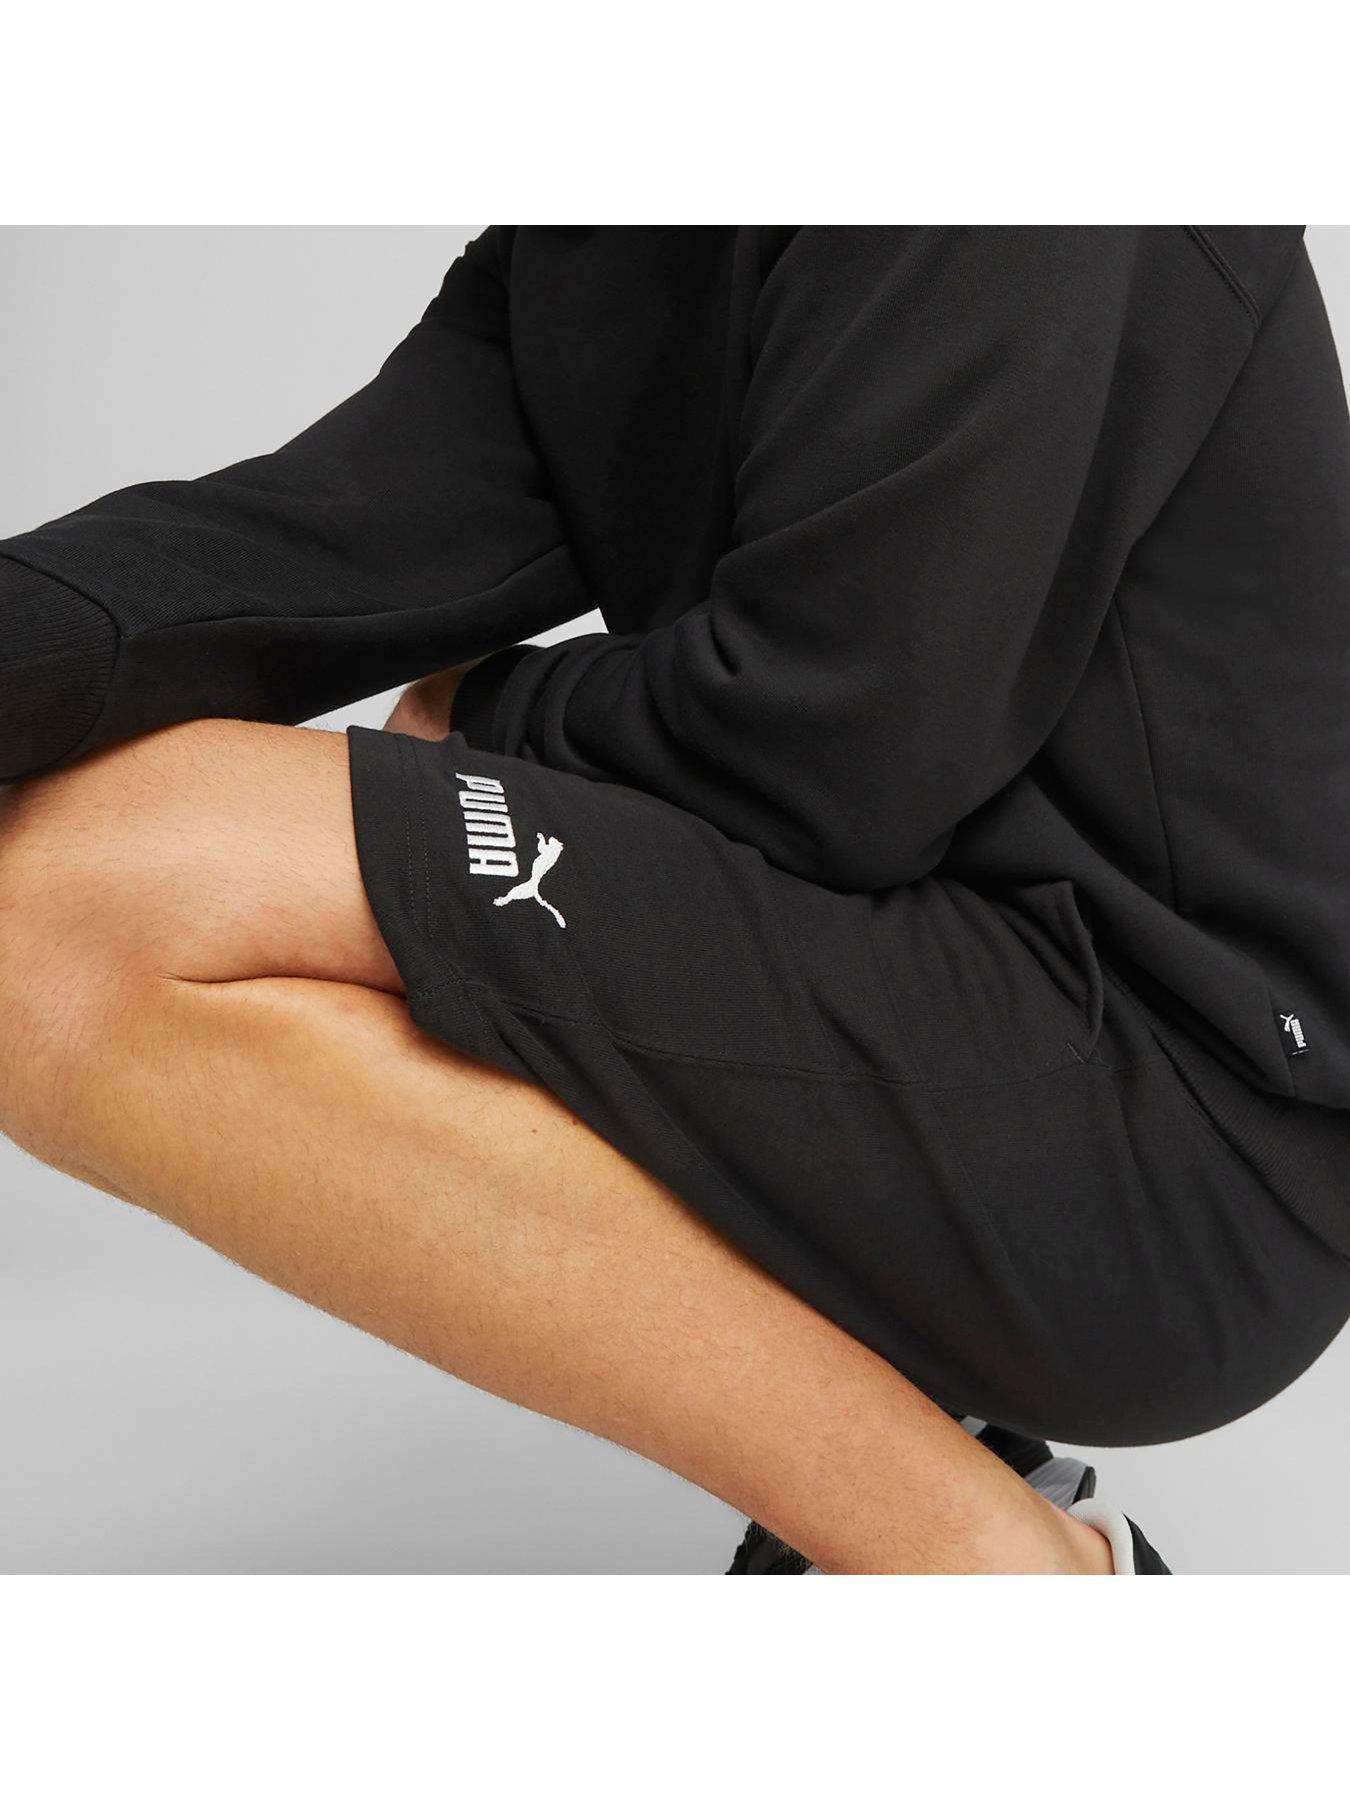 Puma Mens Relaxed Sweat Suit - Black | Very.co.uk